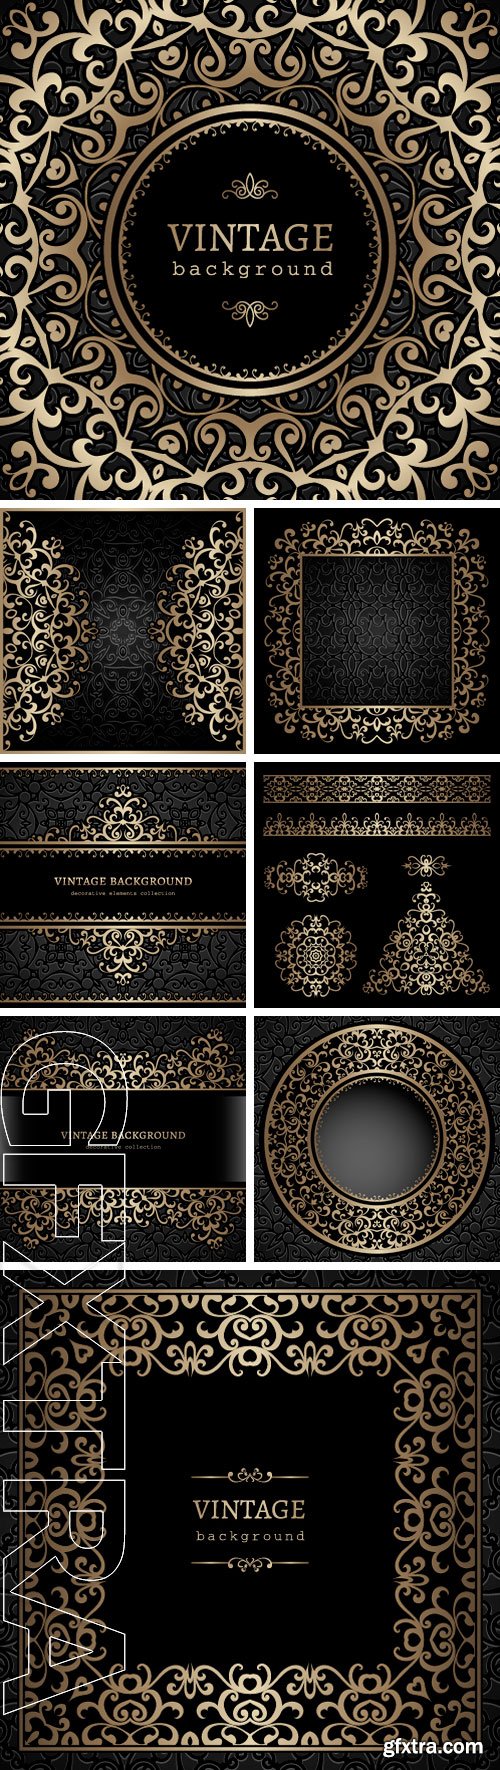 Stock Vectors - Vector set of vintage gold ornamental borders and swirly decorative design elements on black